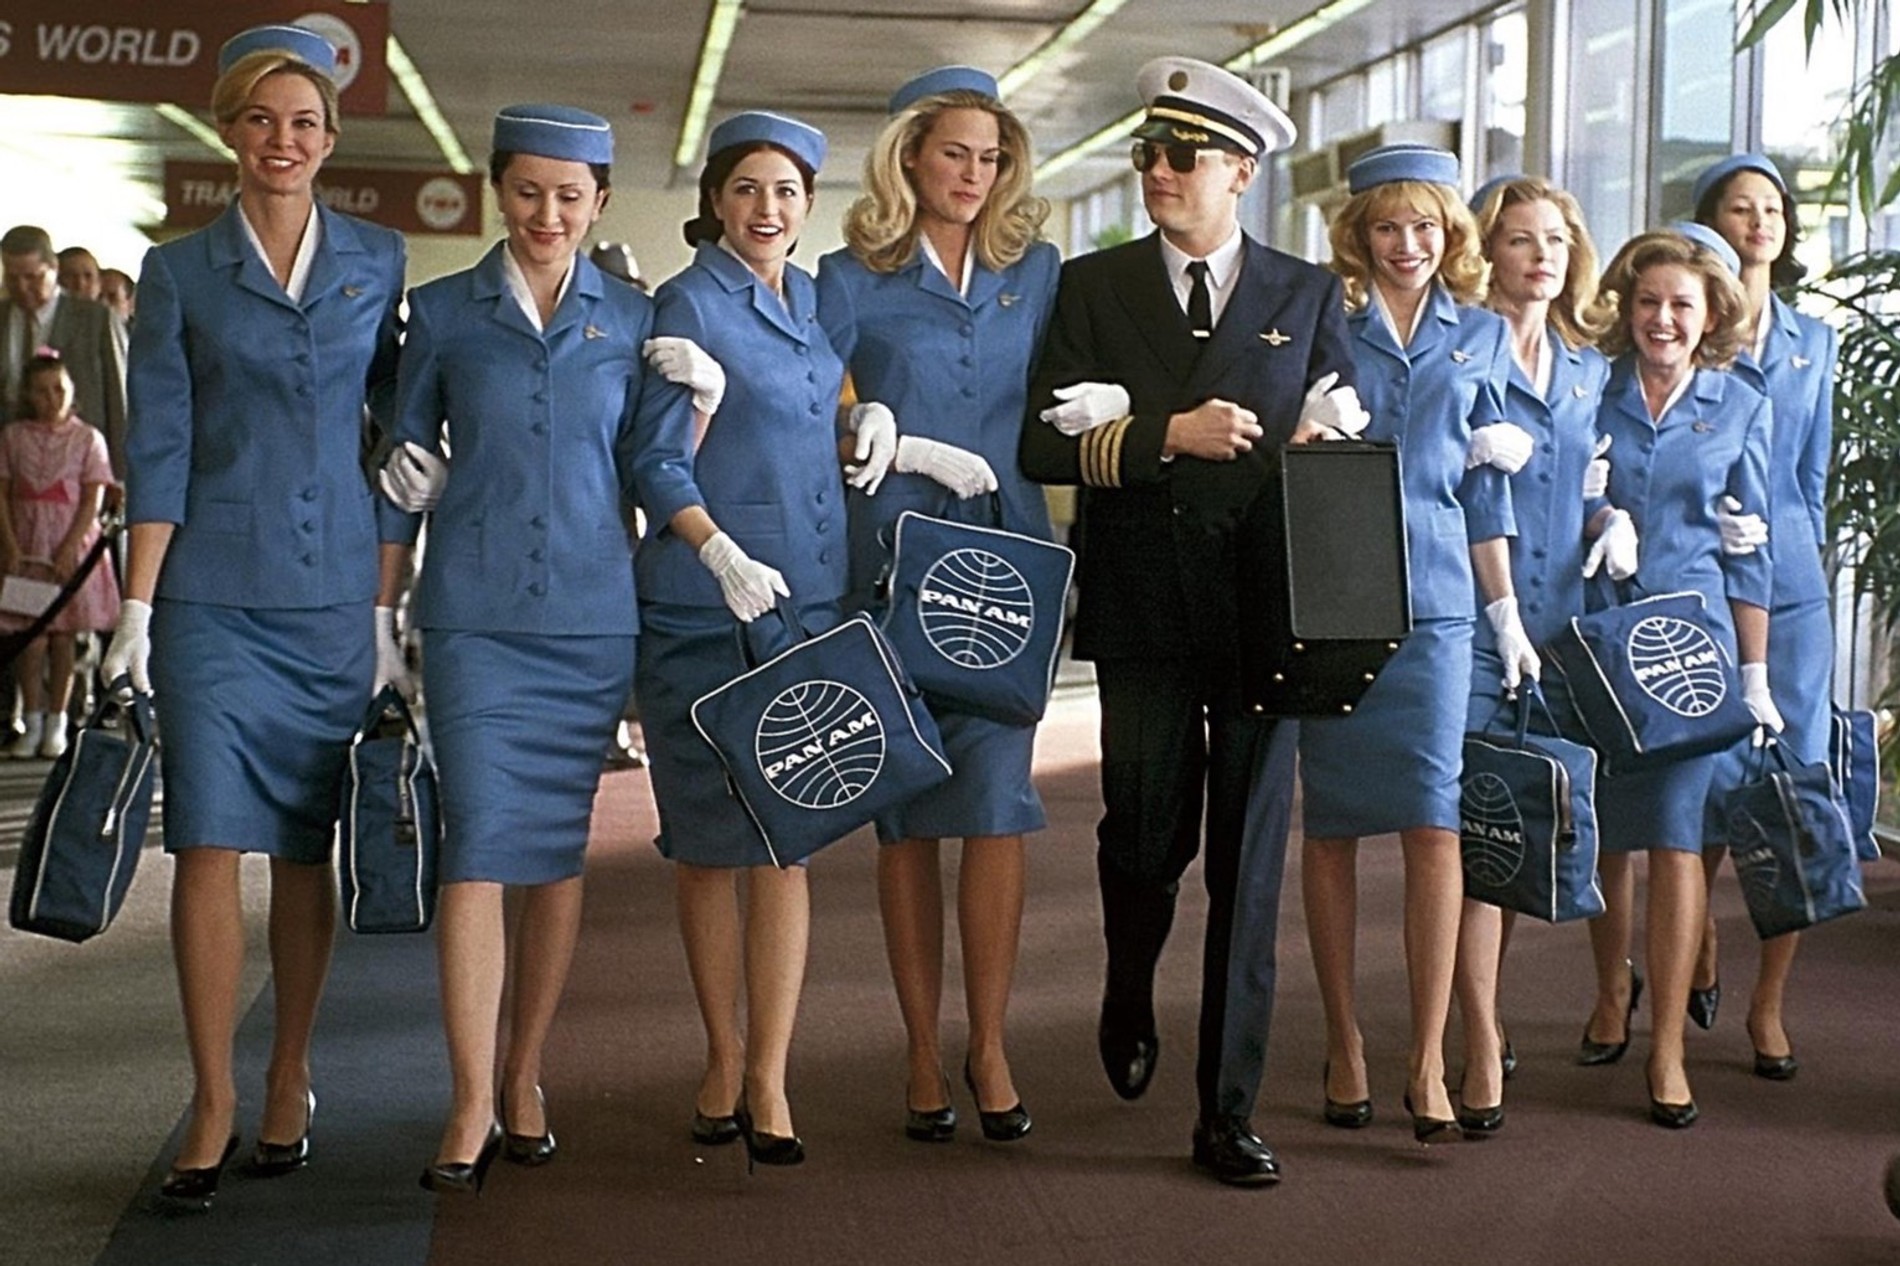 Catch Me If You Can: The Flight Attendant and the International Passengers